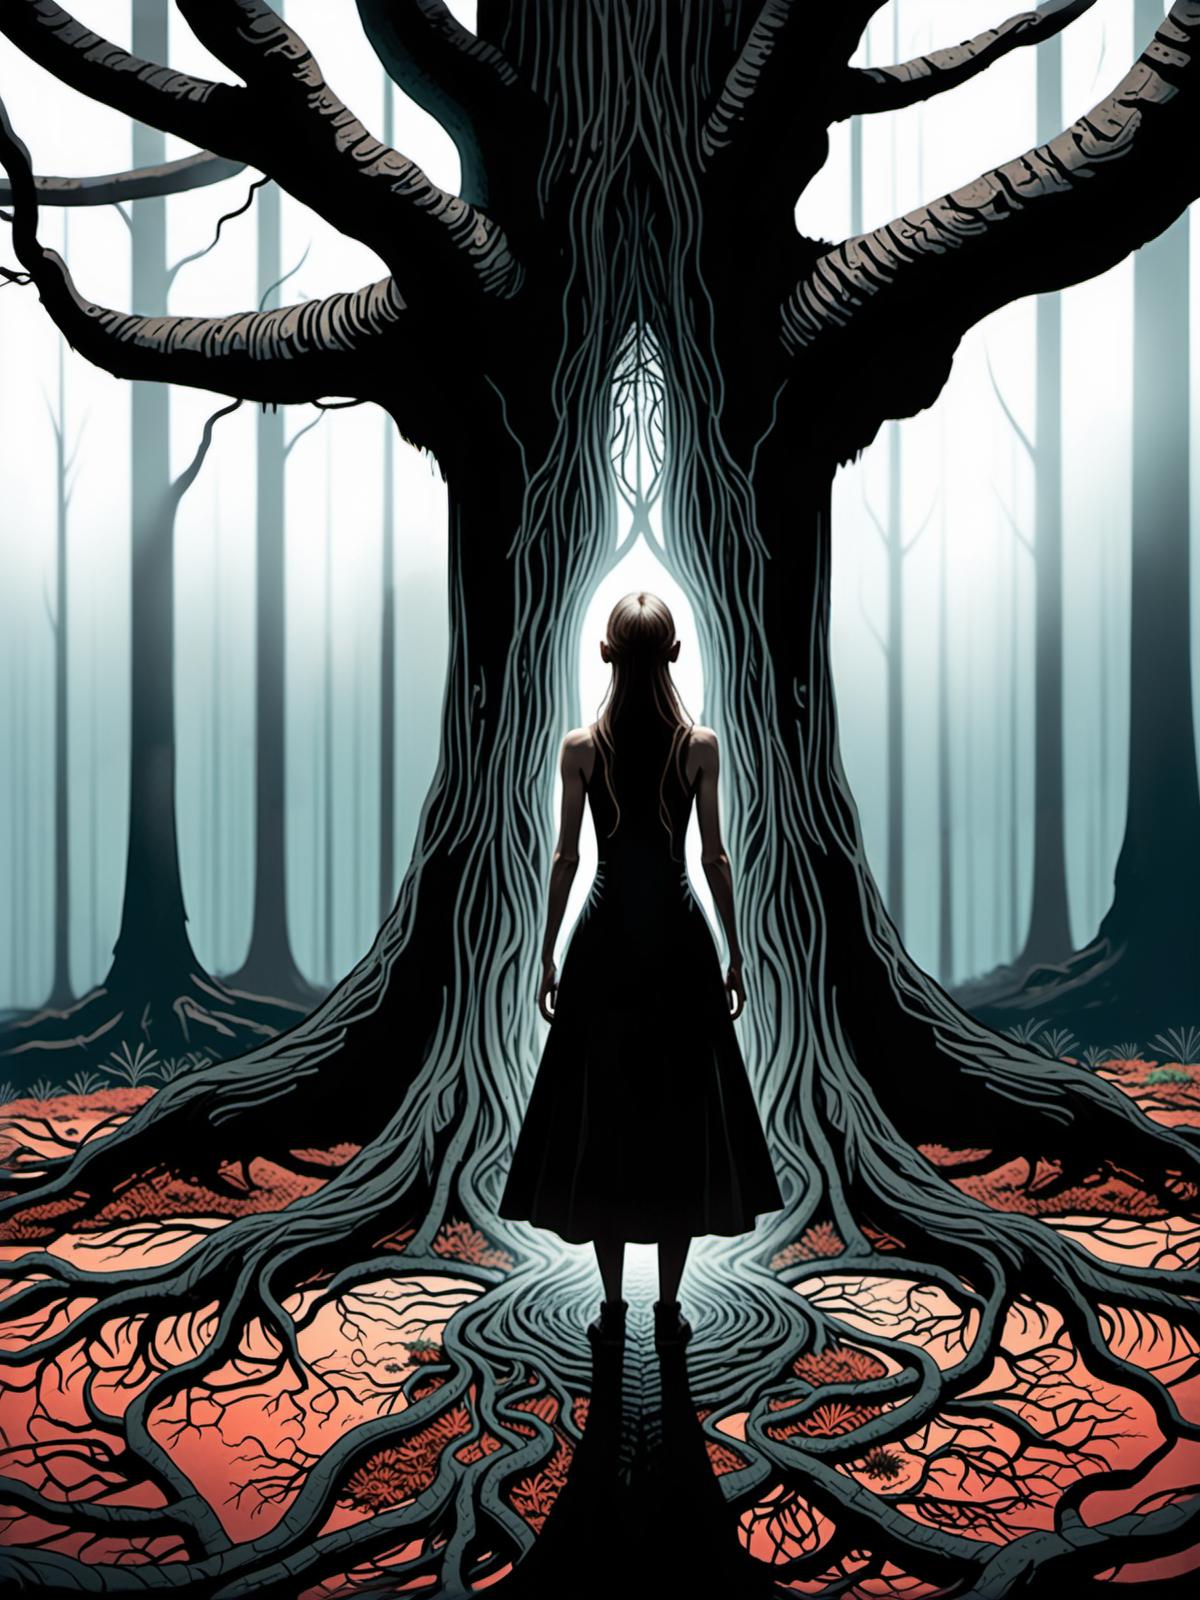 A woman walking through a dark forest with a tree trunk and roots.